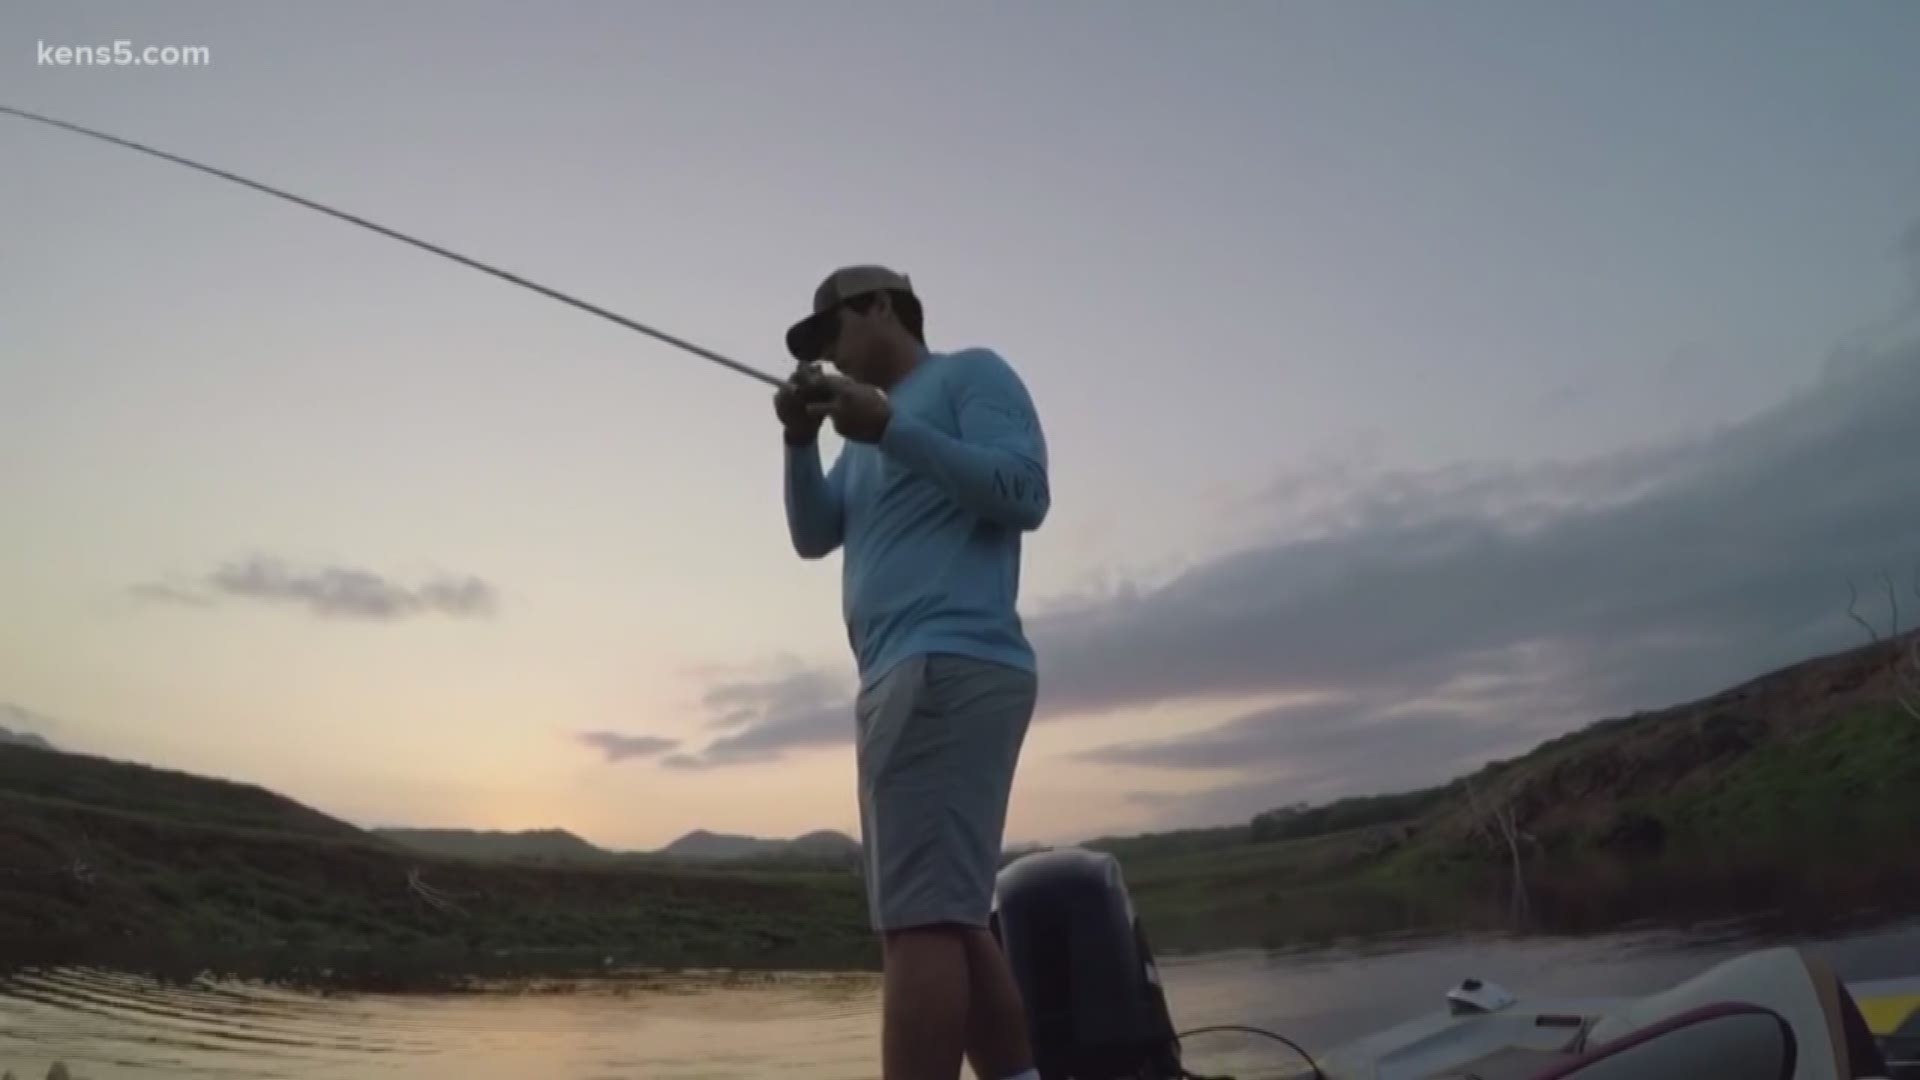 Roping, fishing, pitching...is there anything Bernie Martinez can't do?